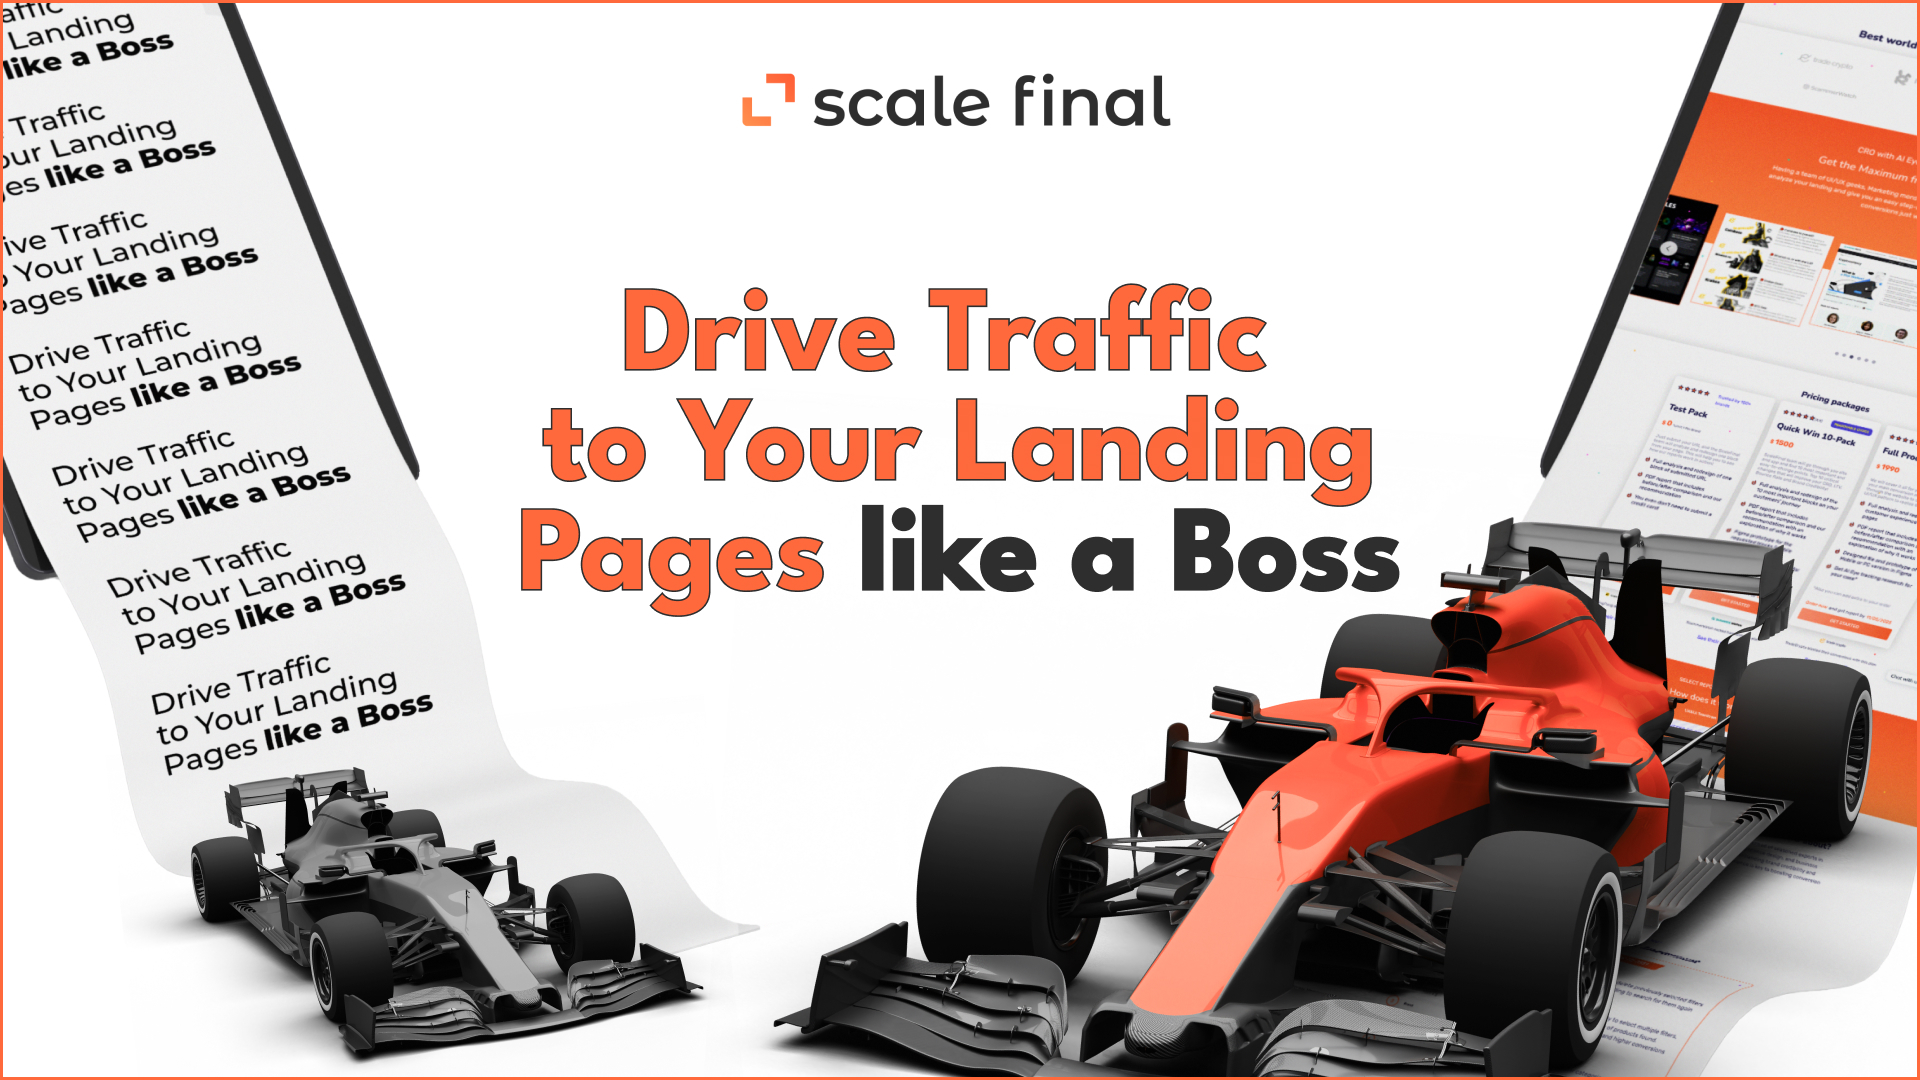 Drive Traffic to Your Landing Pages like a Boss